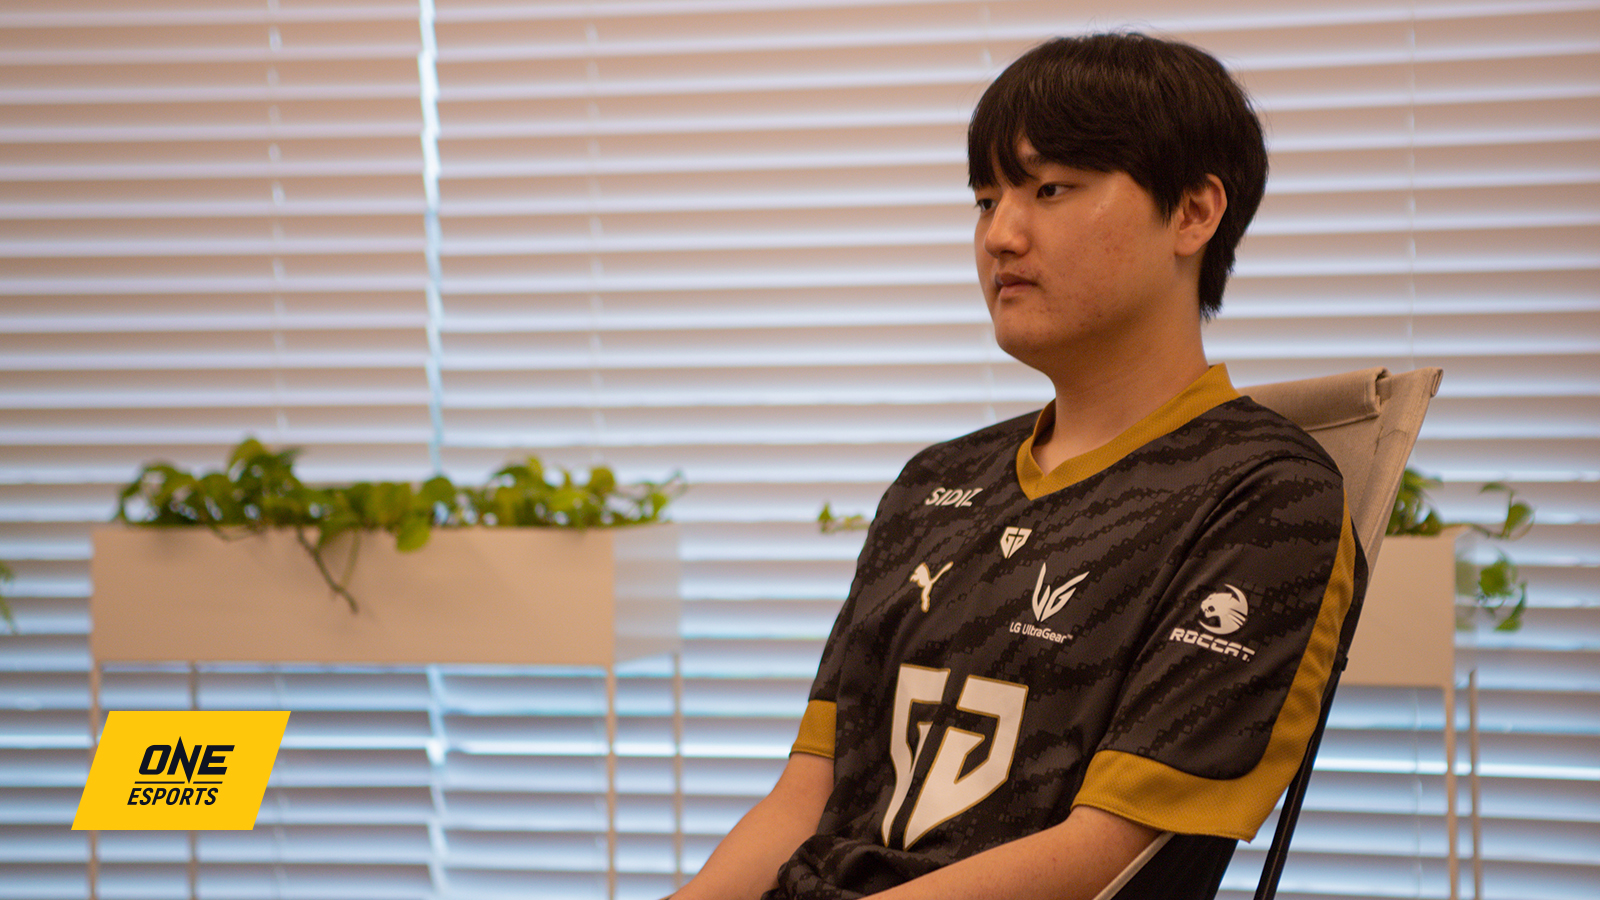 Gen.G Peyzs mom hired a live-in League of Legends tutor ONE Esports